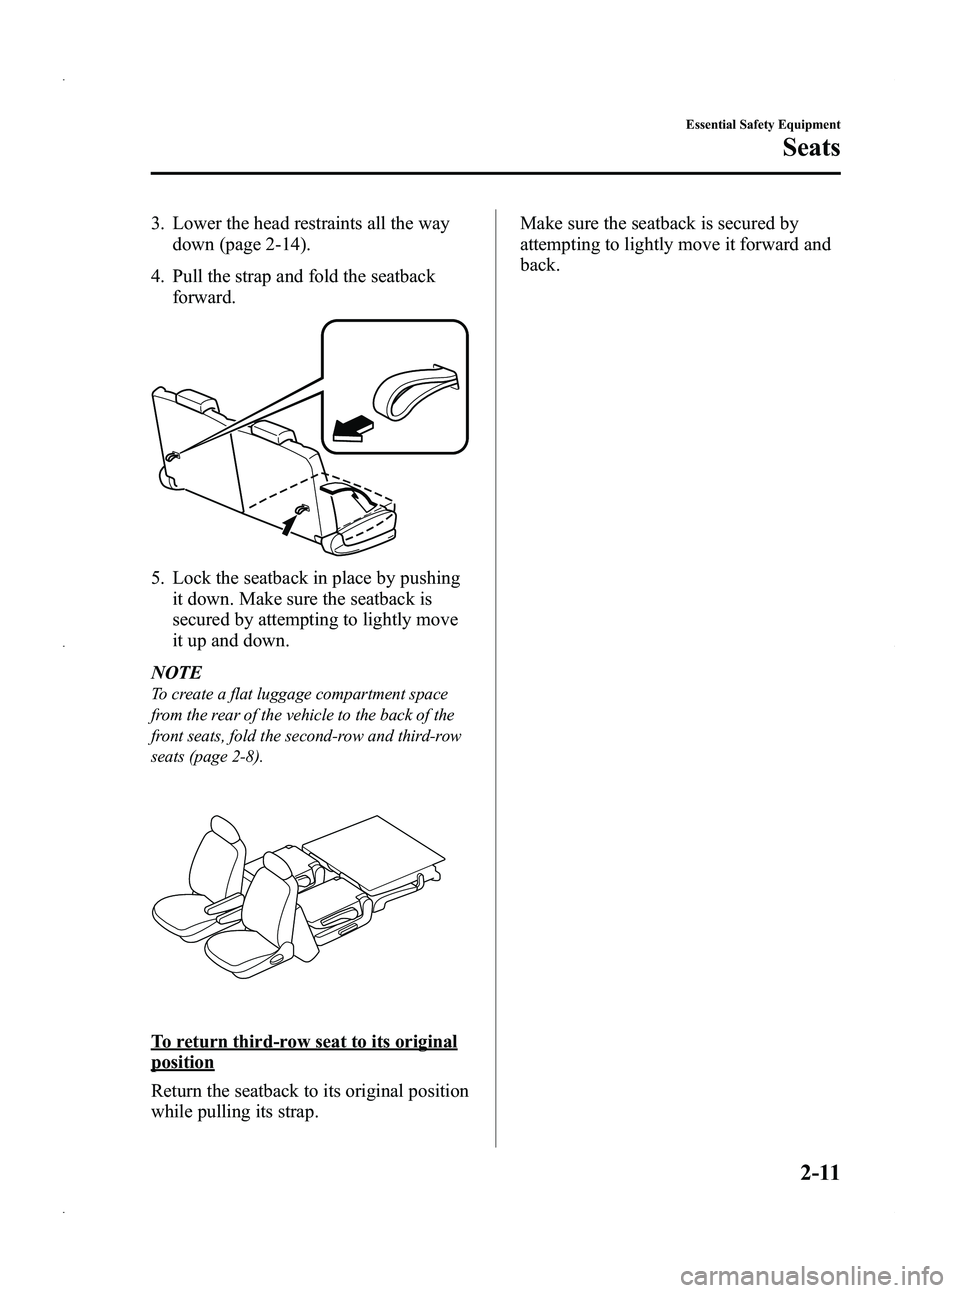 MAZDA MODEL 5 2013 Owners Manual Black plate (23,1)
3. Lower the head restraints all the waydown (page 2-14).
4. Pull the strap and fold the seatback forward.
5. Lock the seatback in place by pushing
it down. Make sure the seatback i